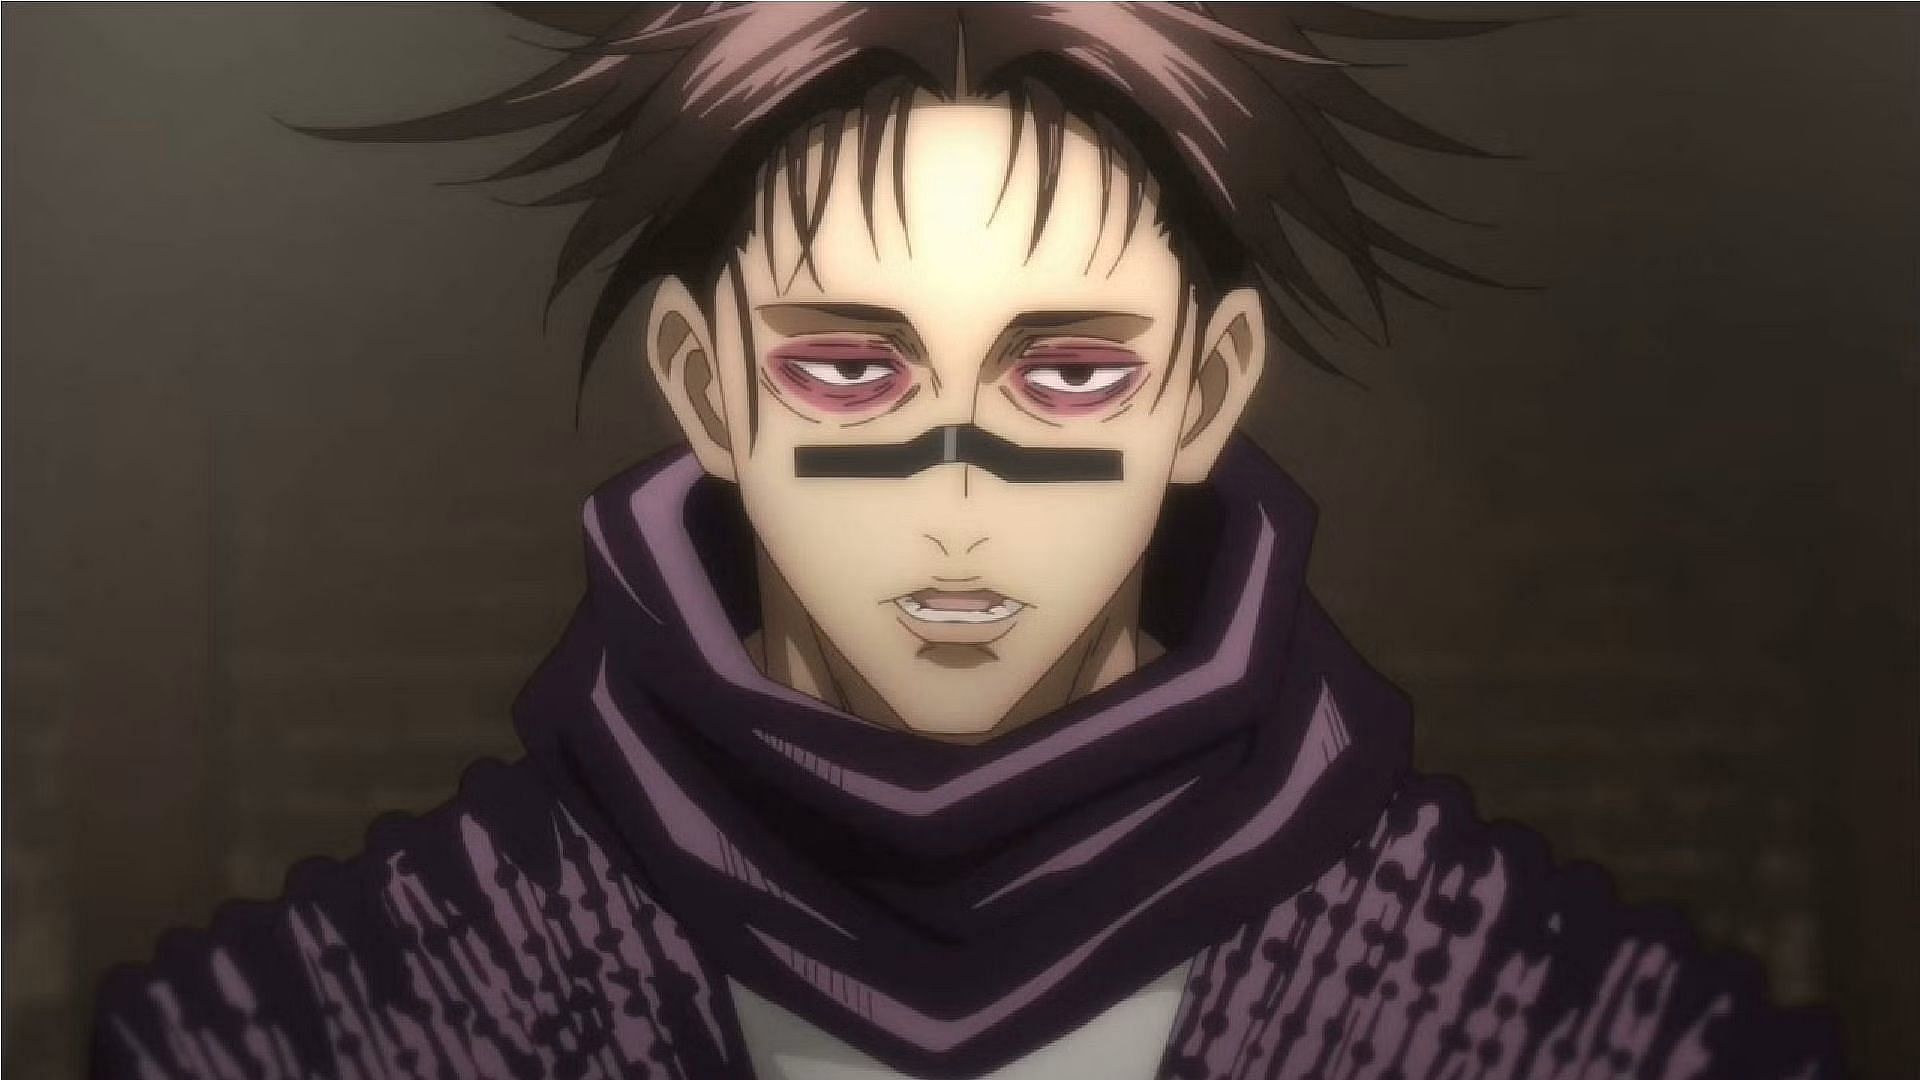 Choso as seen in the anime (Image via MAPPA)